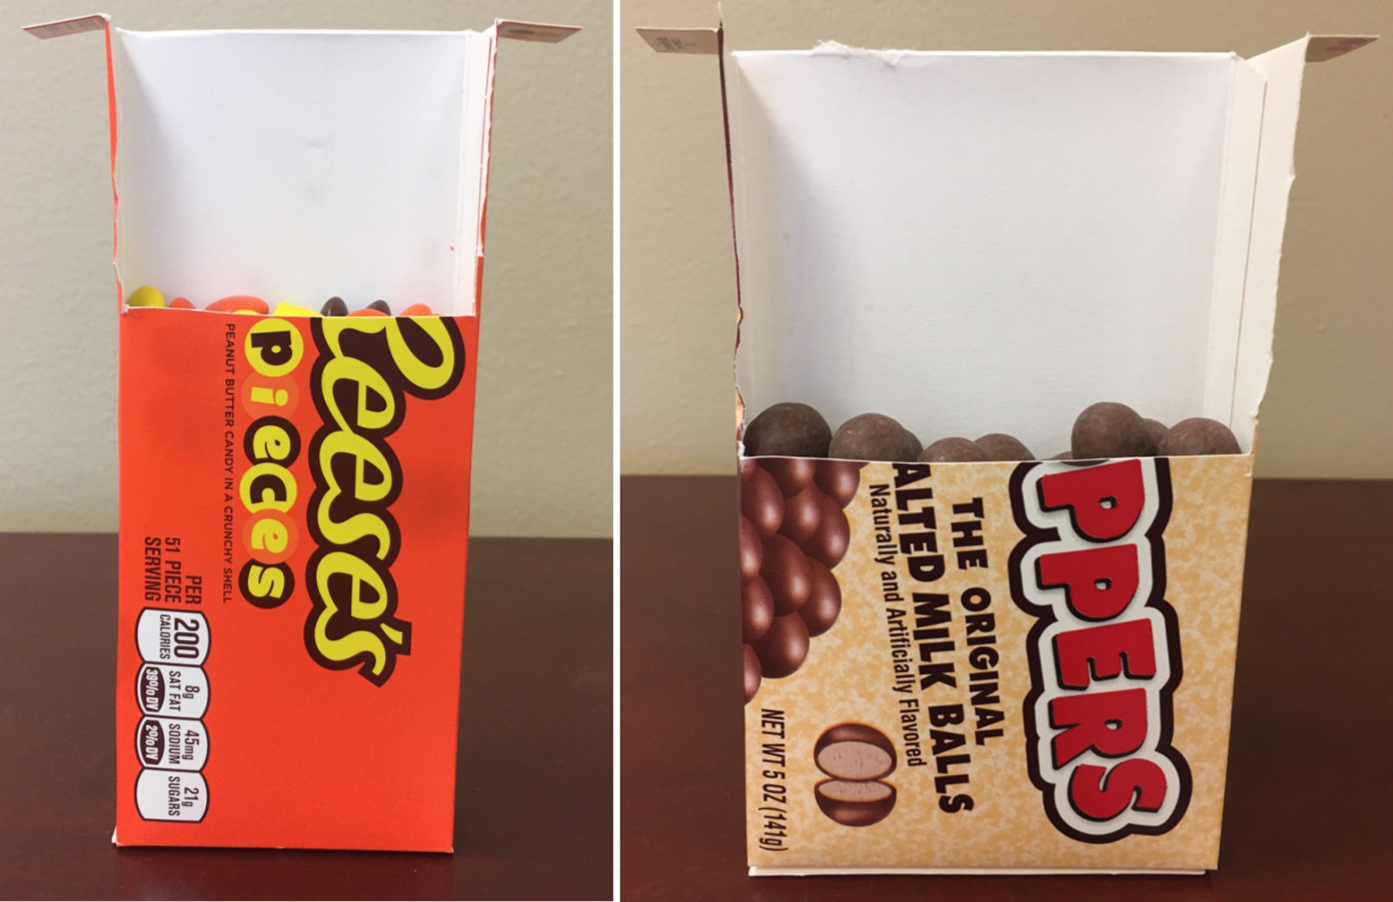 Federal Lawsuit Over Under-Filled Whoppers And Reese's Pieces